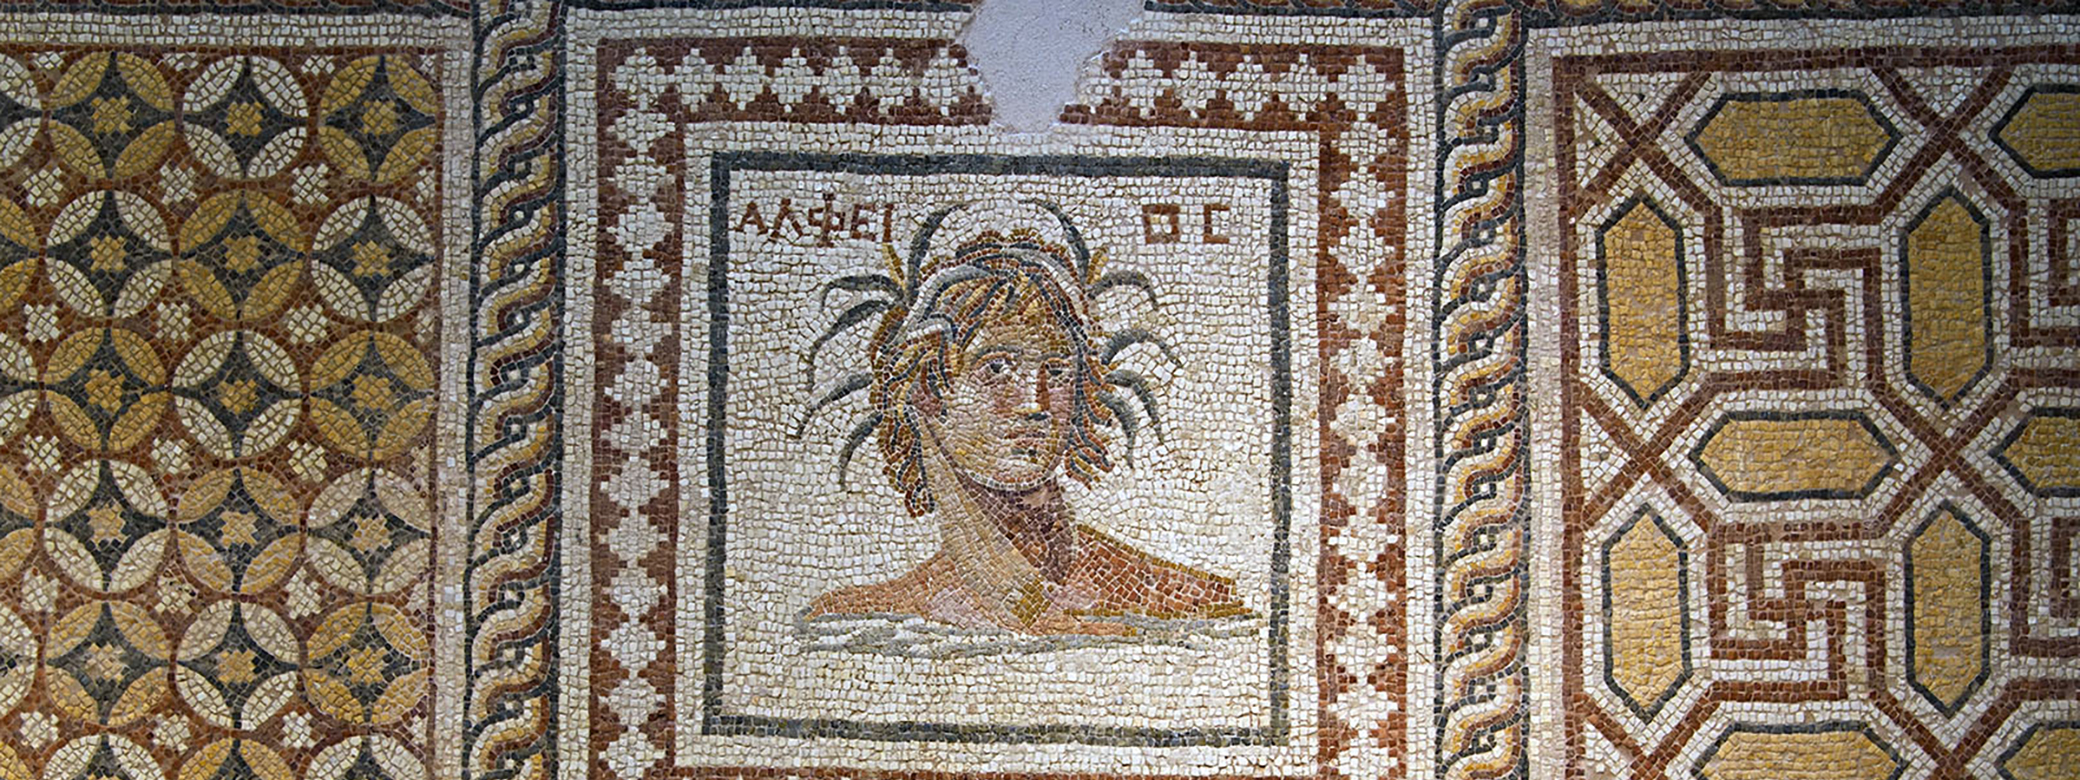 Mosaic from antiquity